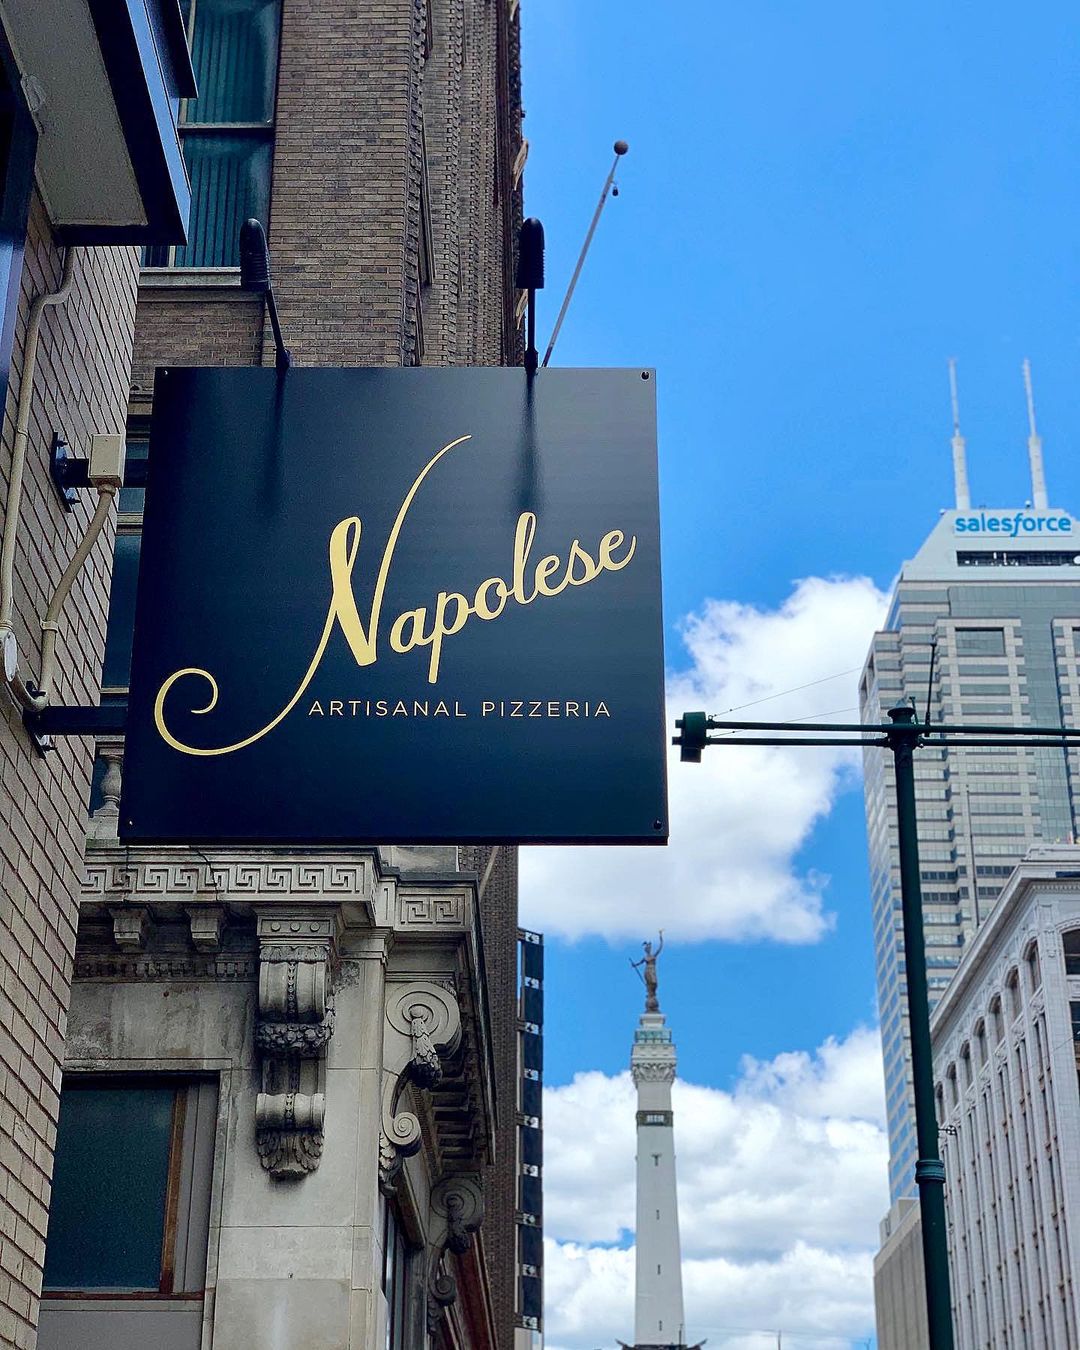 Napolese Downtown reopens Tuesday for the first time in nearly a year